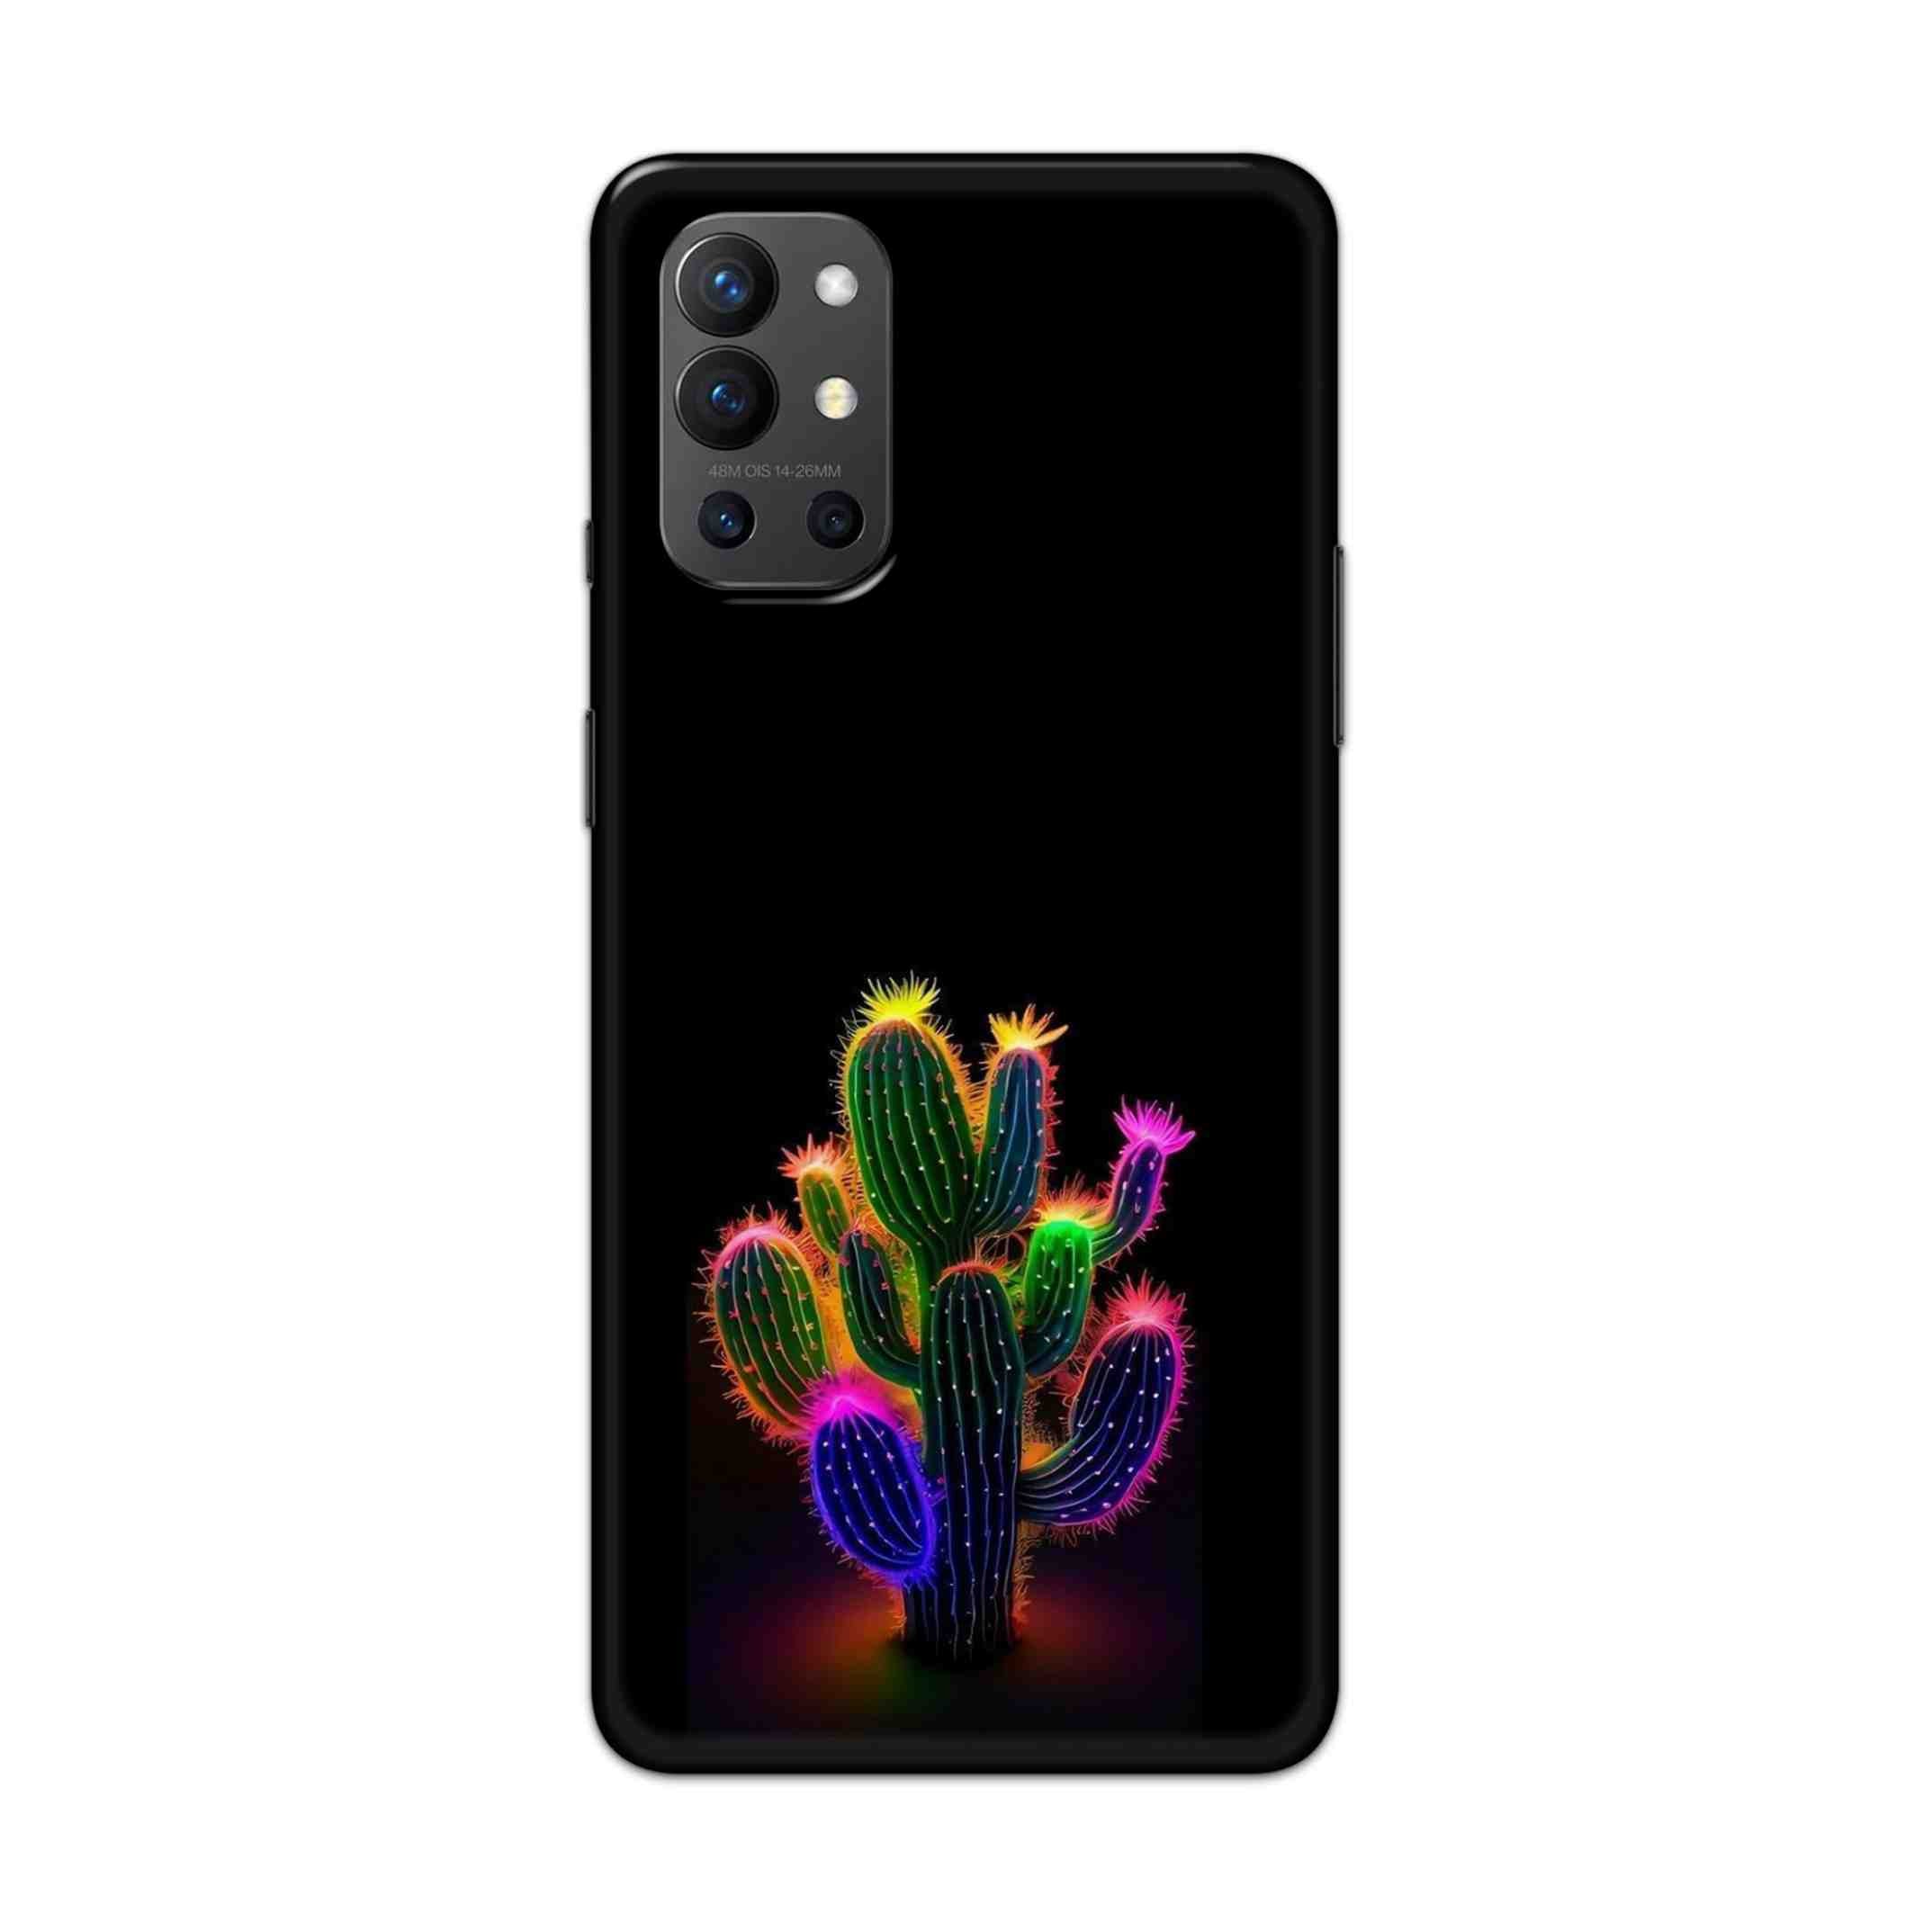 Buy Neon Flower Hard Back Mobile Phone Case Cover For OnePlus 9R / 8T Online